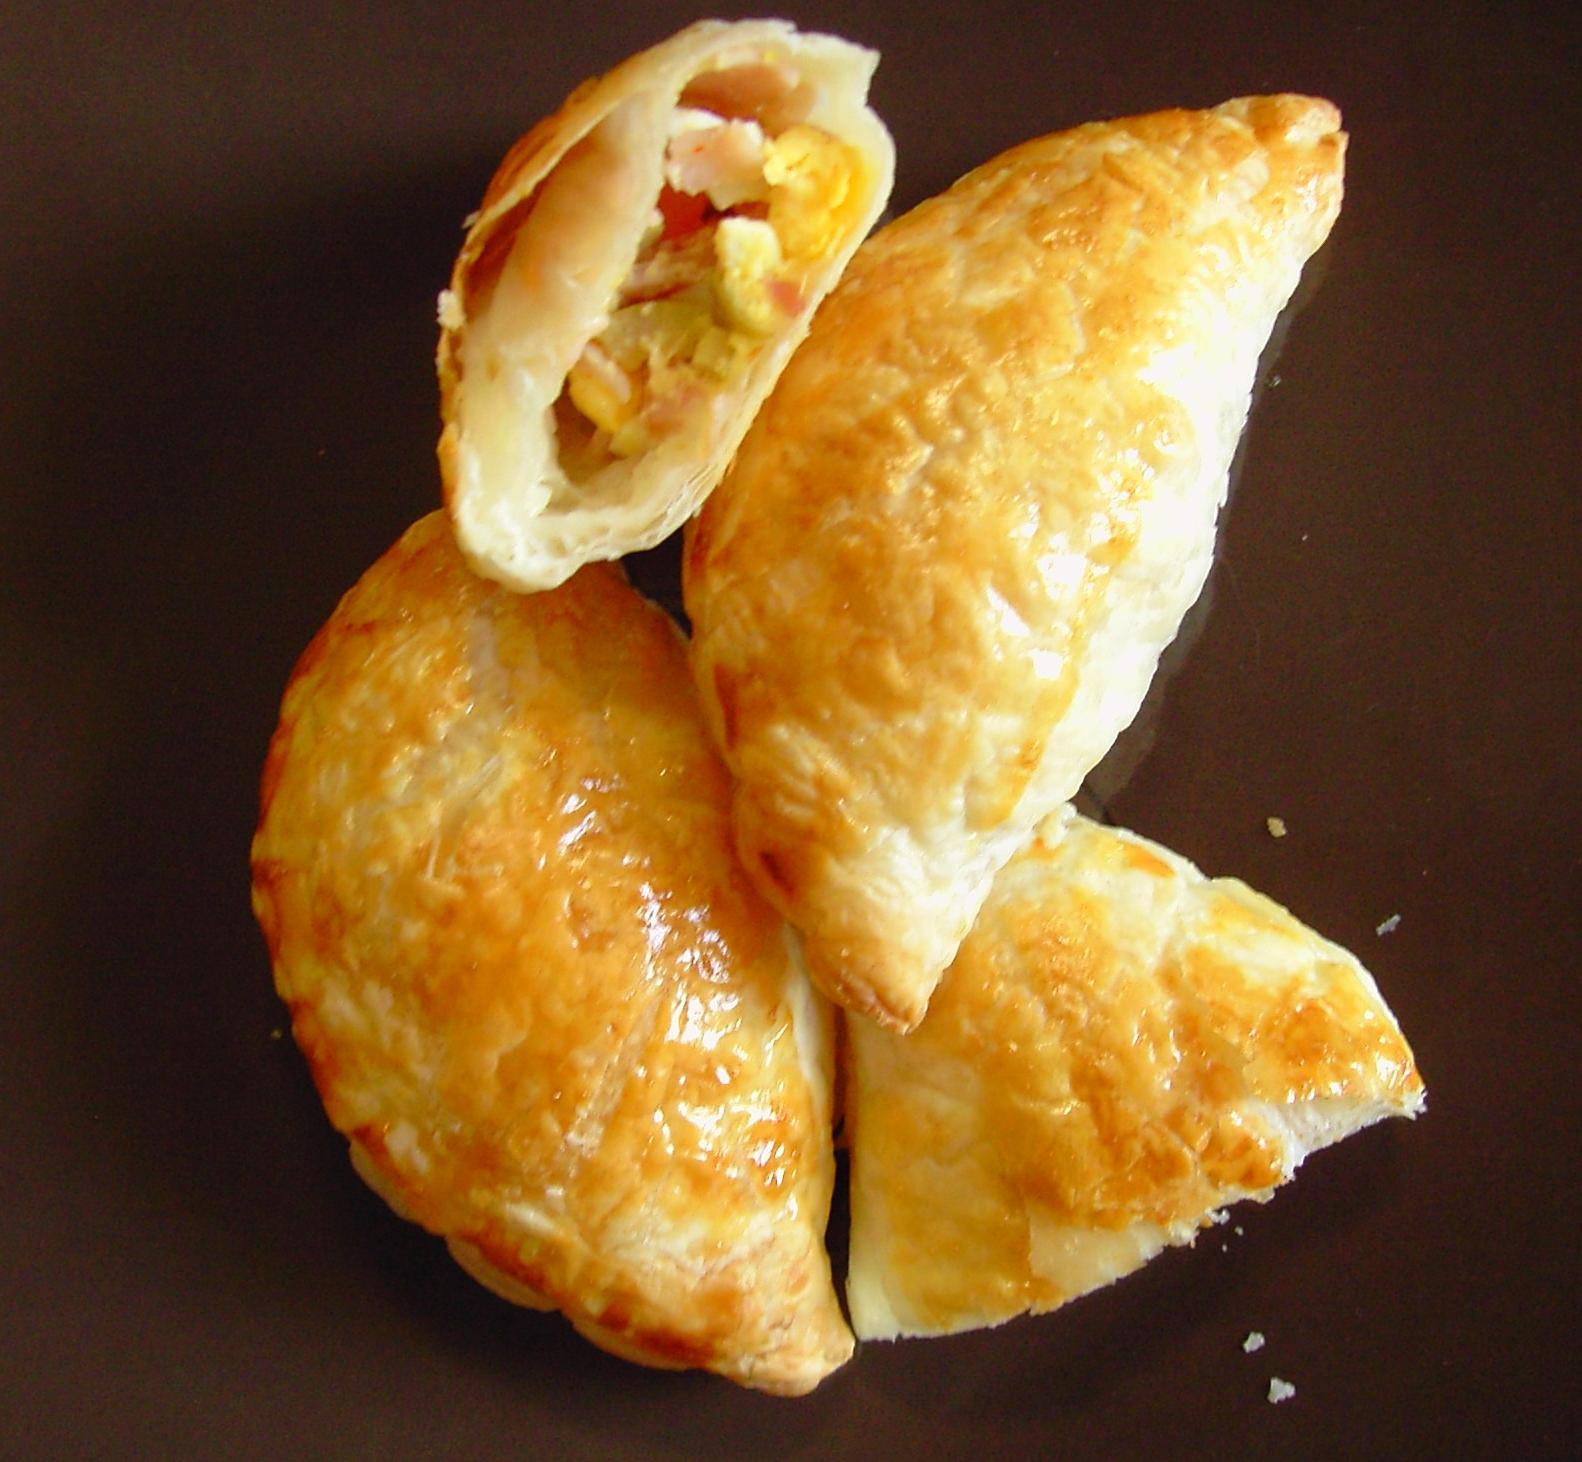  Bite into a warm, flaky empanada filled with savory ham and cheese!